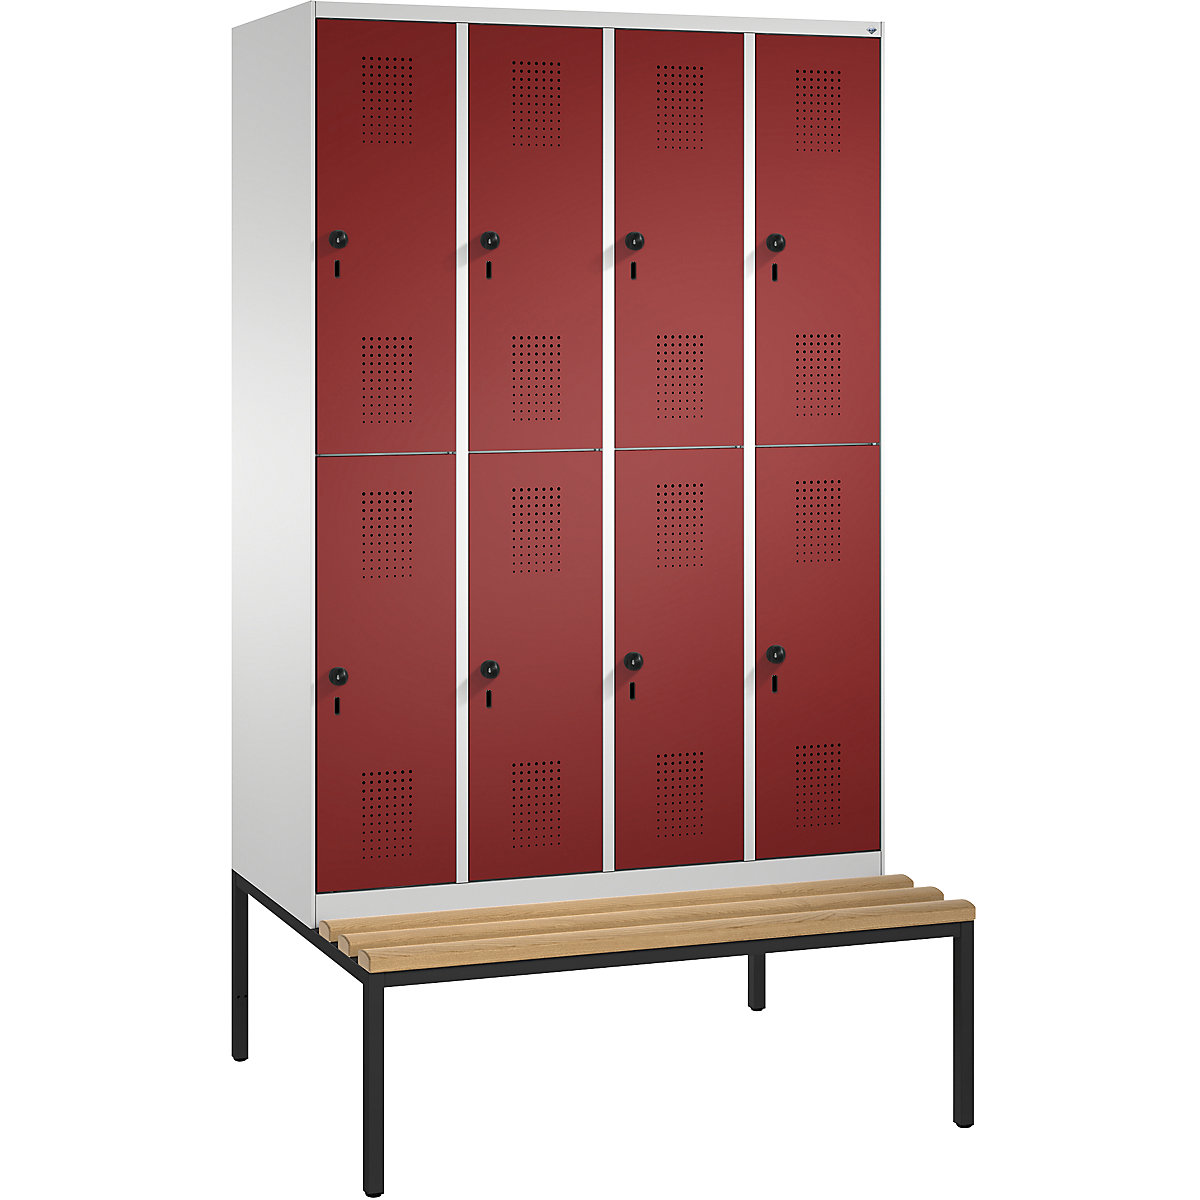 EVOLO cloakroom locker, double tier, with bench – C+P, 4 compartments, 2 shelf compartments each, compartment width 300 mm, light grey / ruby red-4